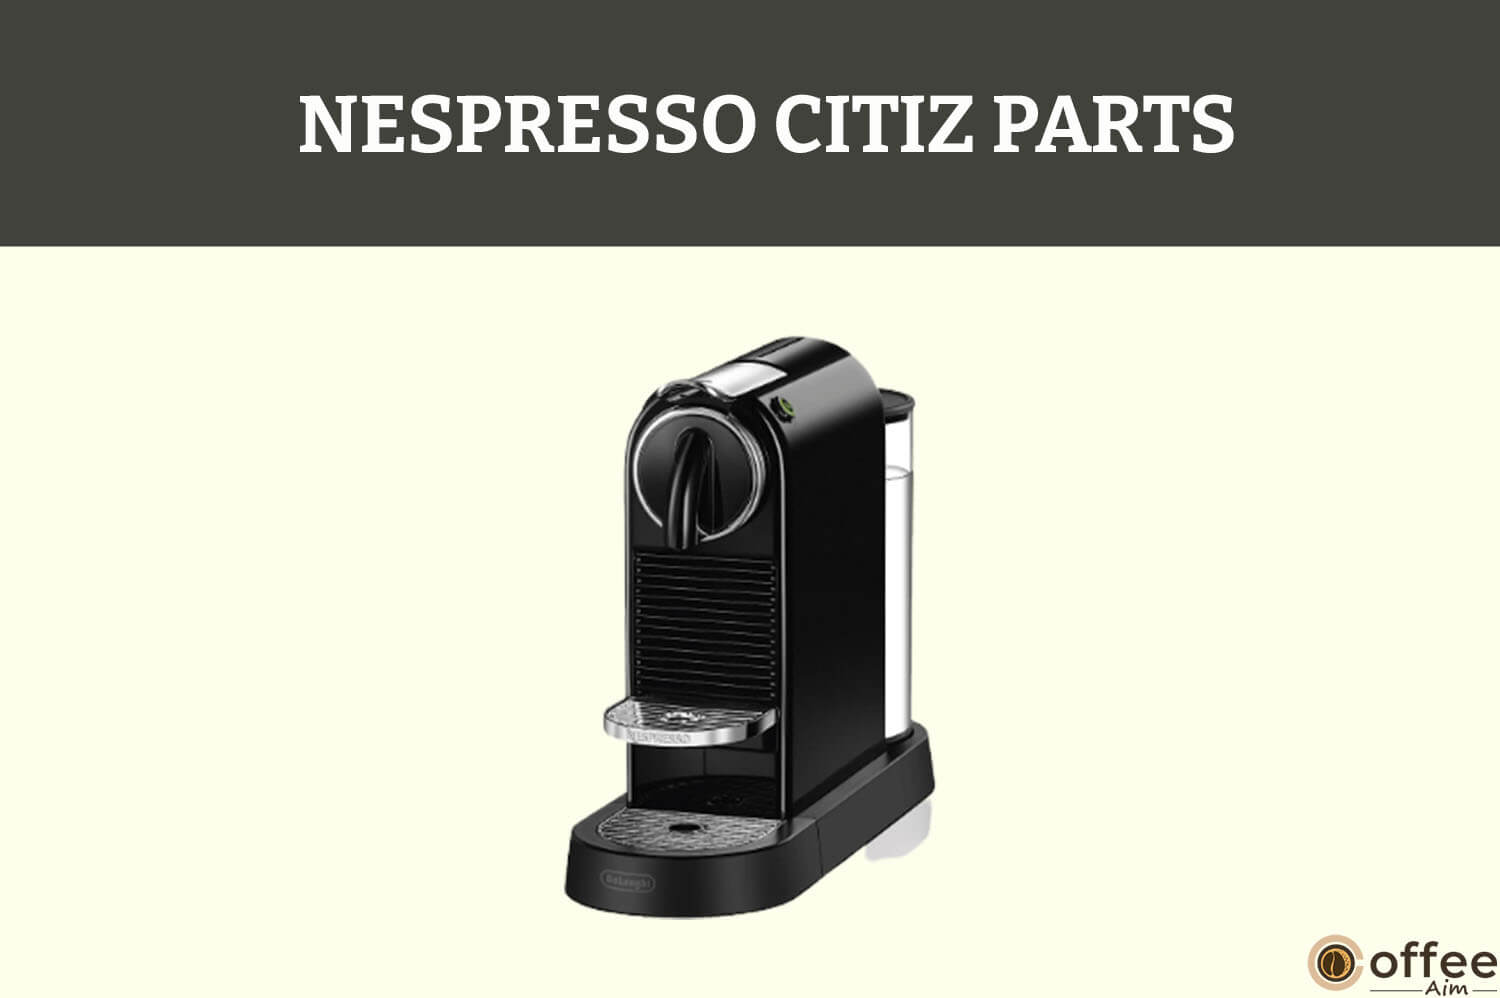 Featured image for the article "Nespresso Citiz Parts"